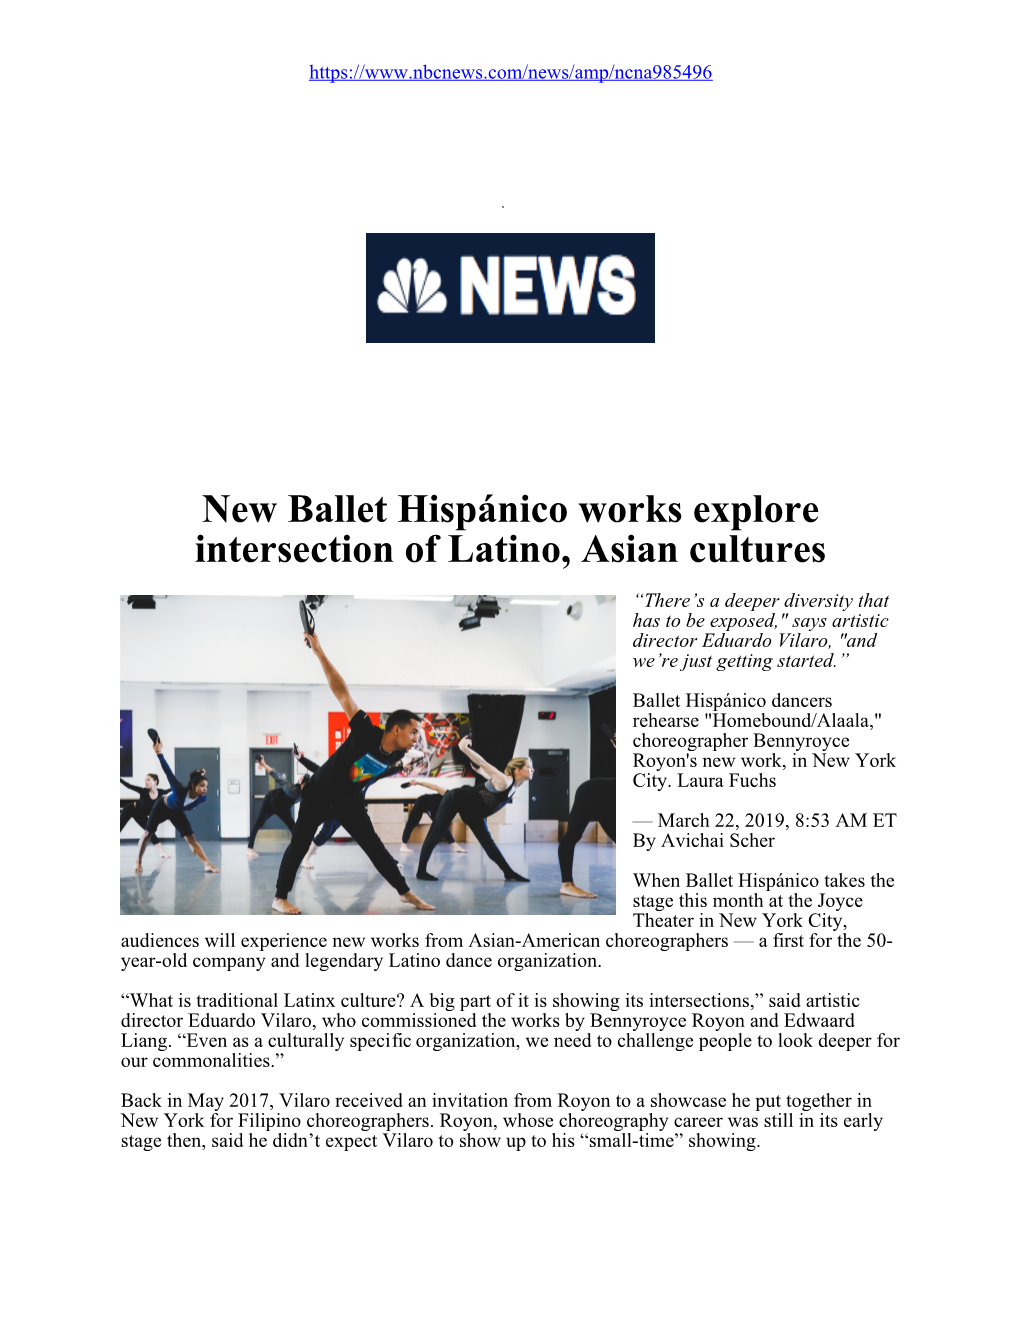 New Ballet Hispánico Works Explore Intersection of Latino, Asian Cultures